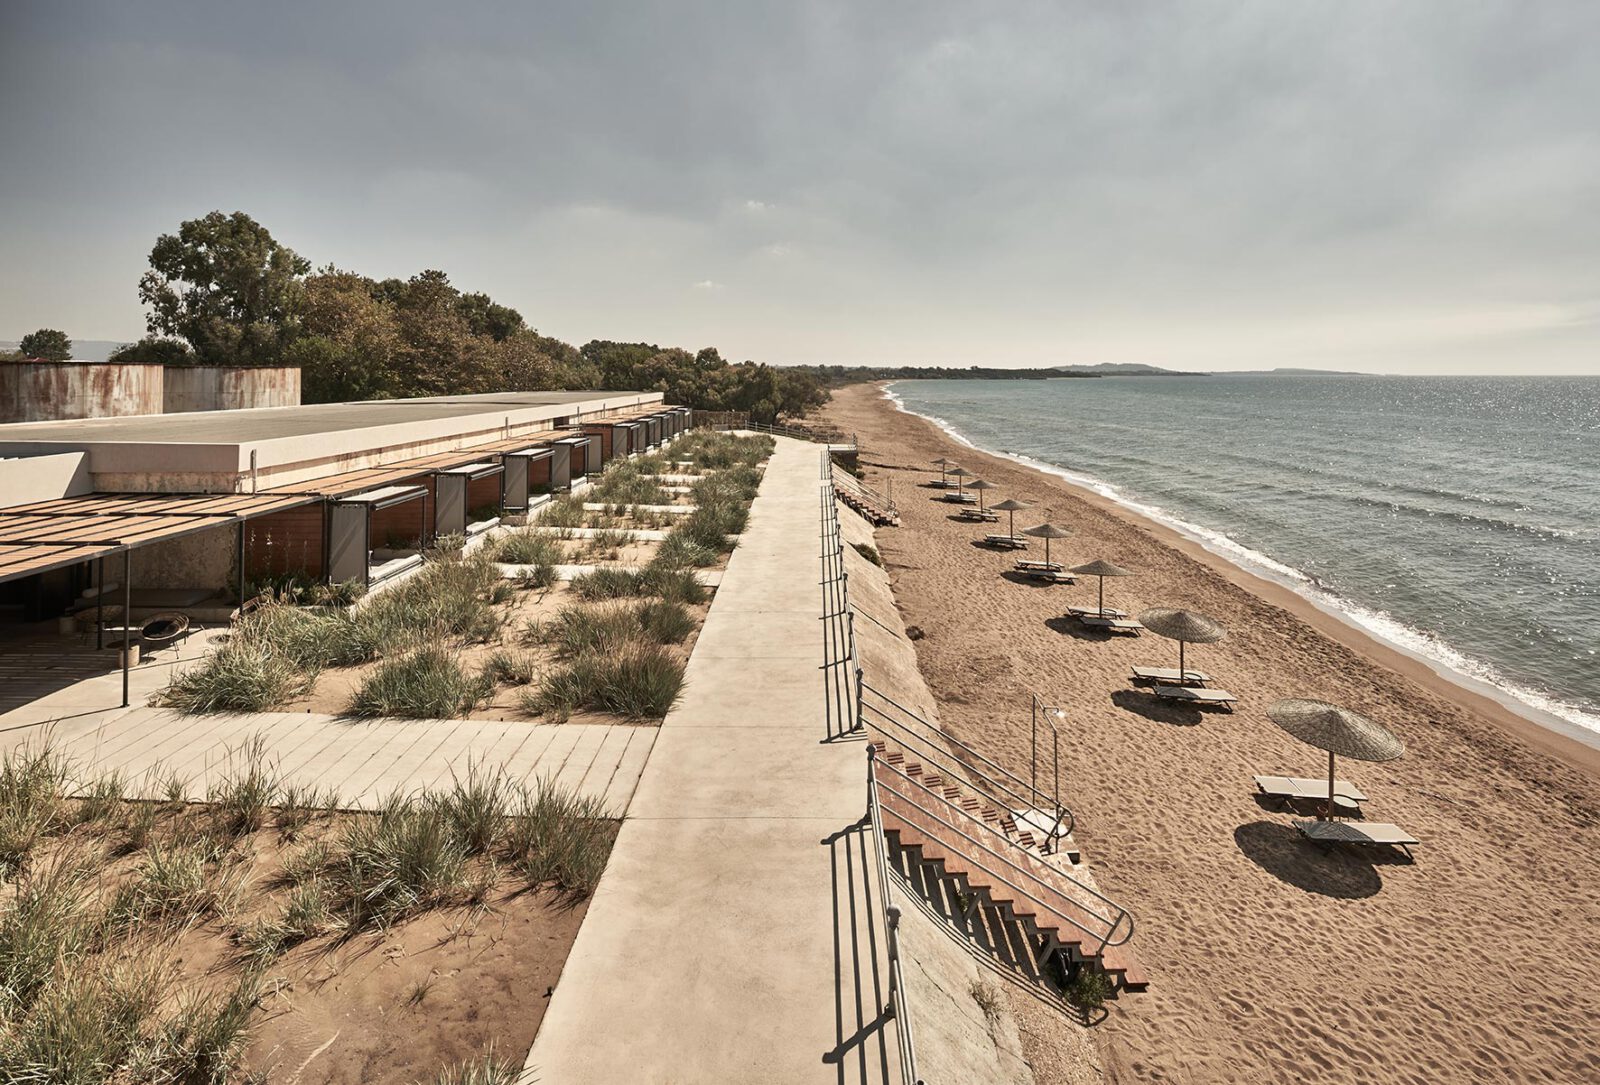 Archisearch Dexamenes Seaside Hotel by K-Studio among the 40 shortlisted works of the 2022 EU Prize for Contemporary Architecture Mies Van Der Rohe Award